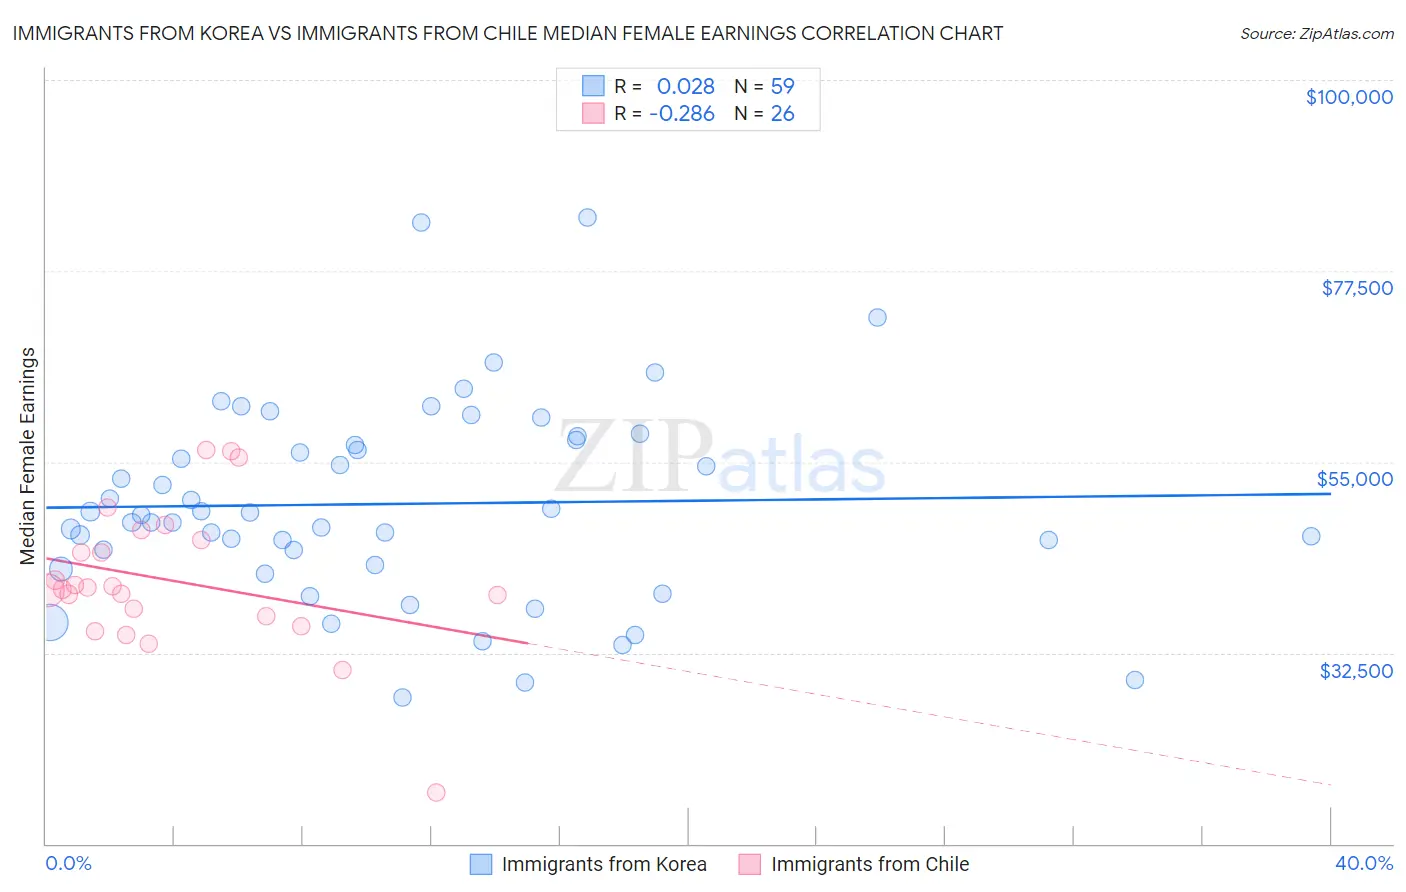 Immigrants from Korea vs Immigrants from Chile Median Female Earnings